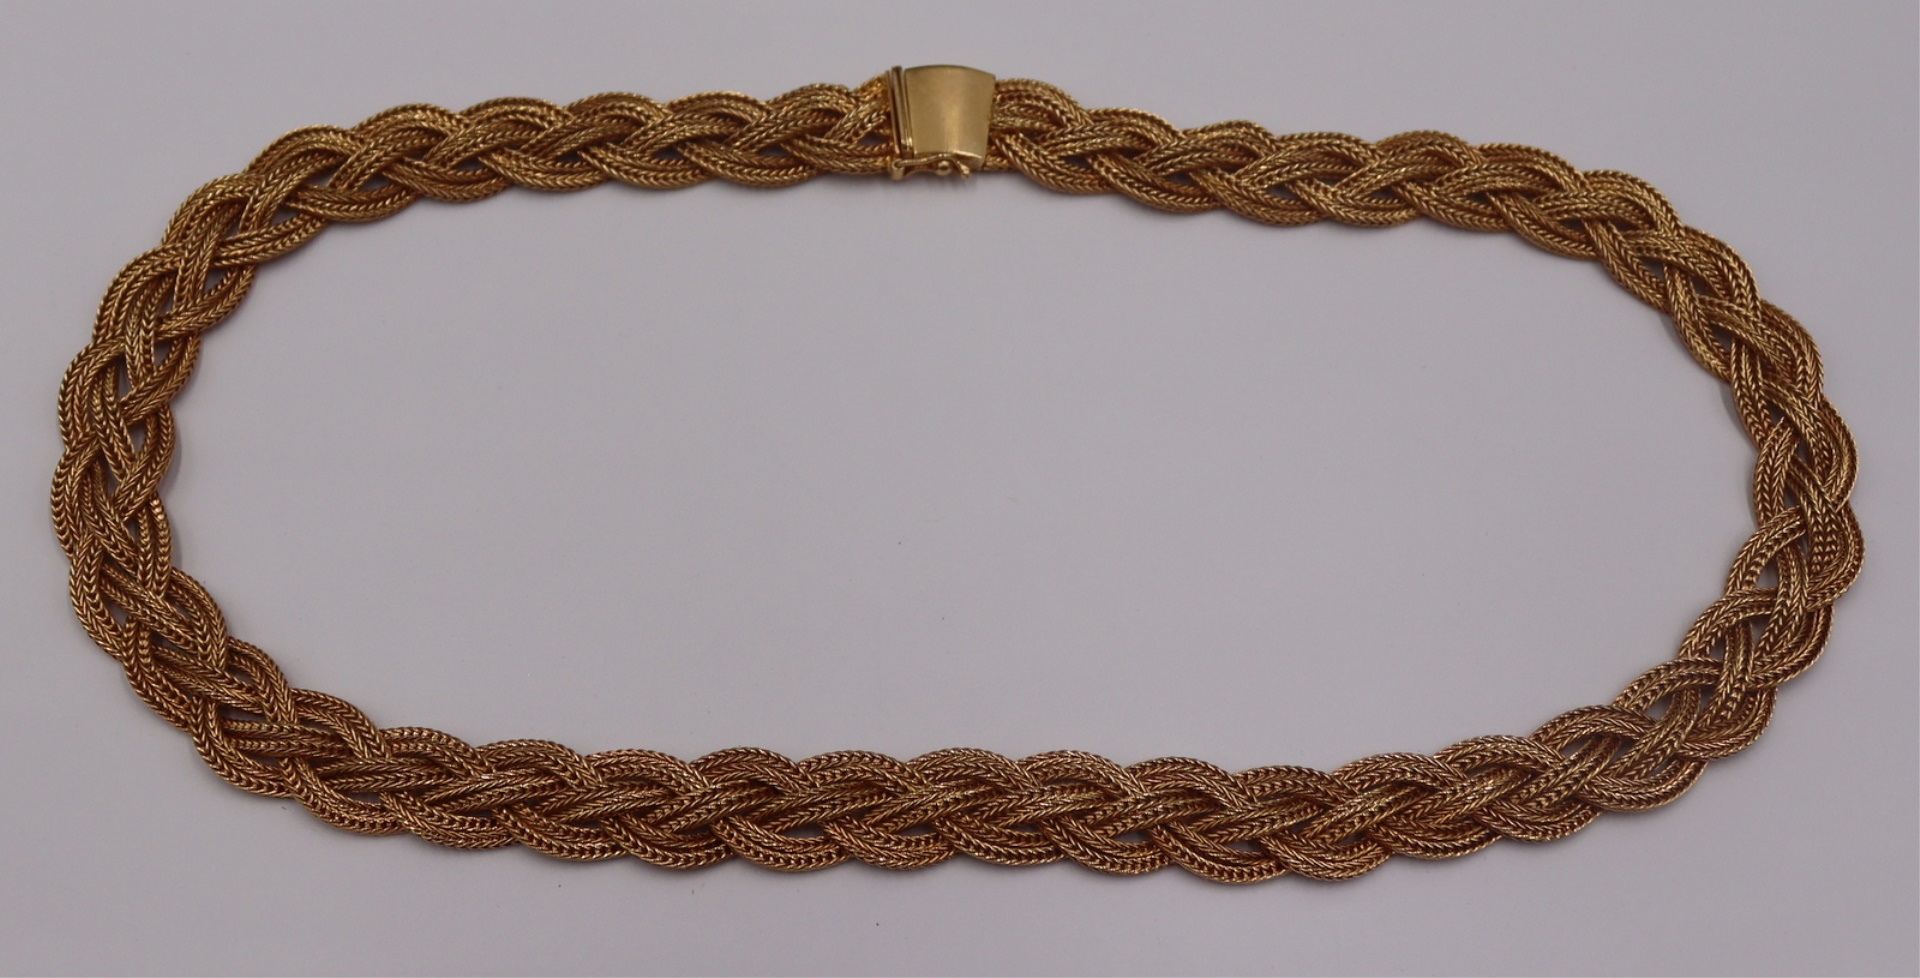 JEWELRY 18KT GOLD BRAIDED CHAIN 3bc032